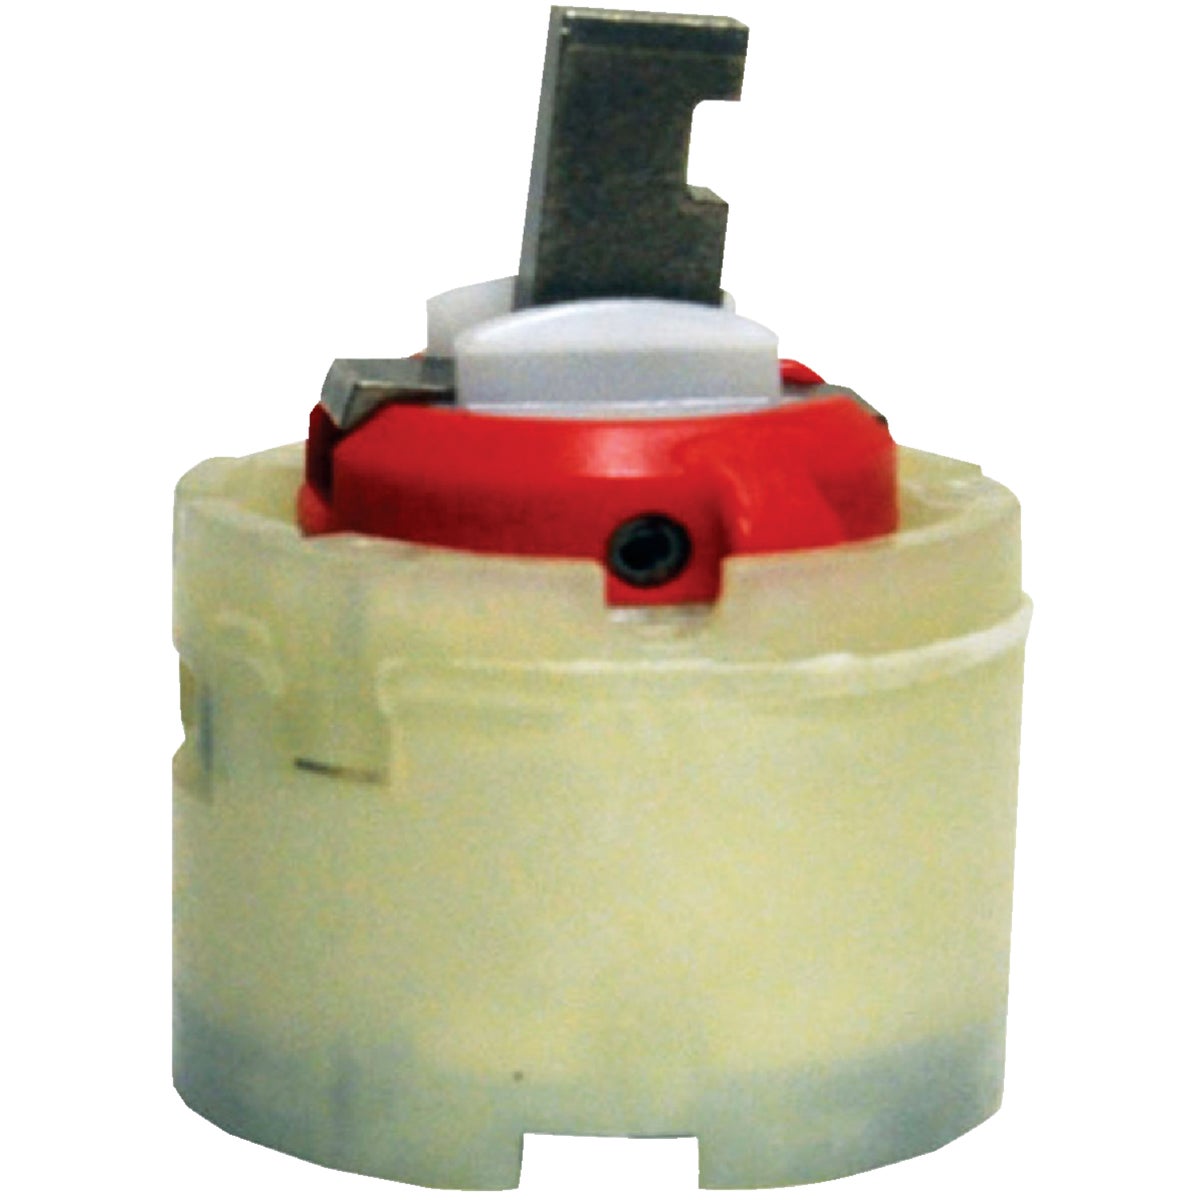 Item 400247, Hot and cold cartridge for American Standard and Eljer faucets with a 